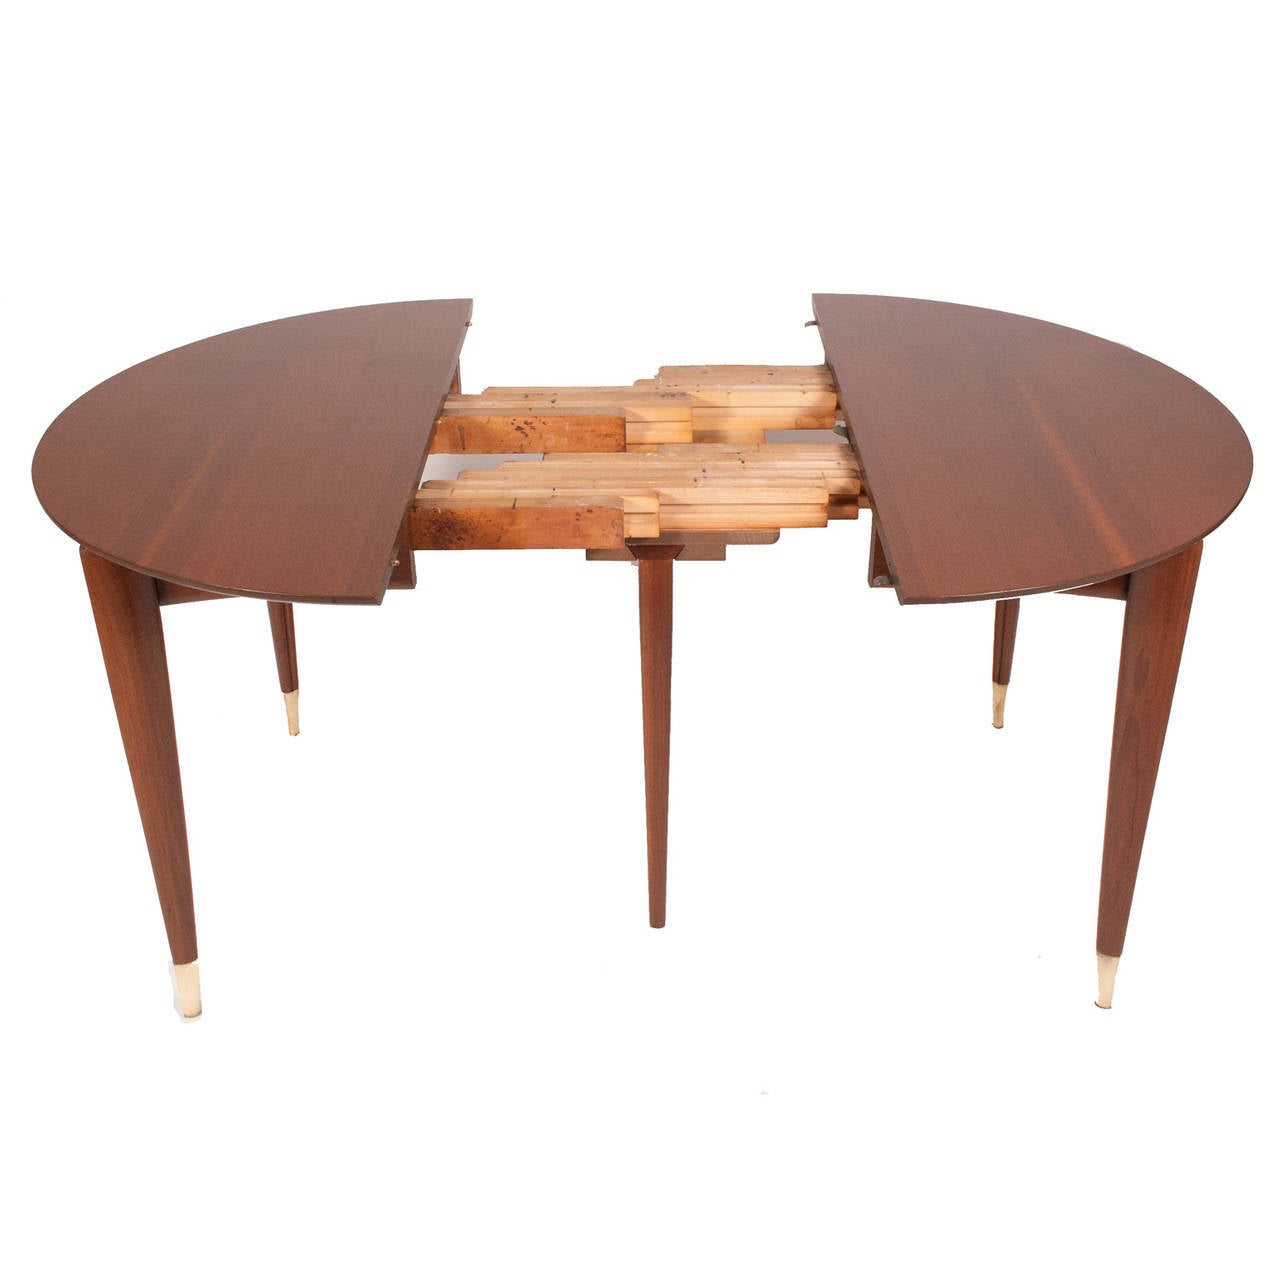 Mid-Century Modern Dining Table by Gio Ponti for M. Singer and Son